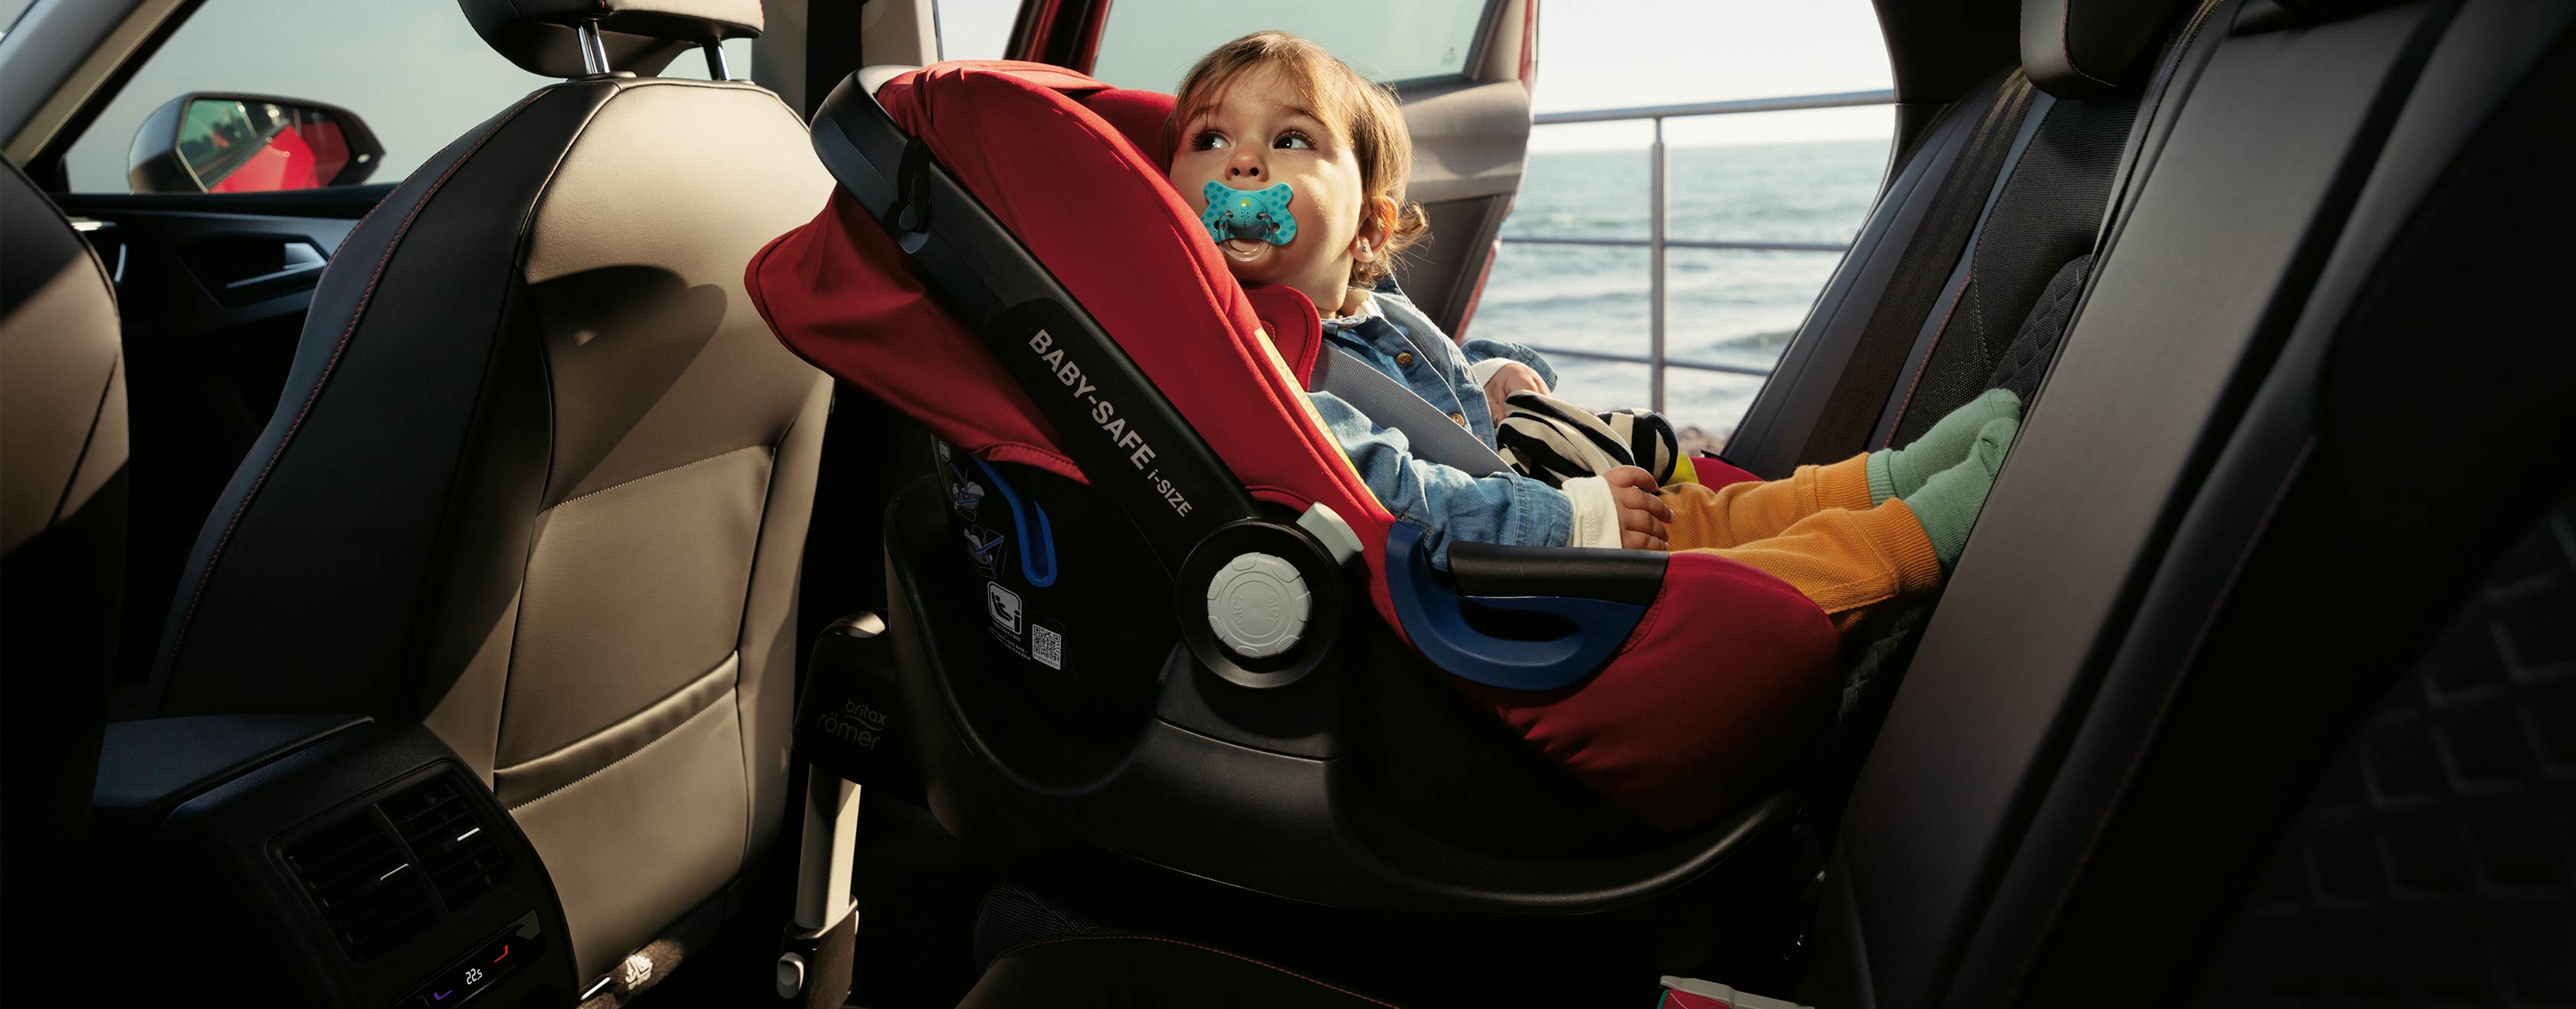 SEAT new car services and maintenance – child in the child seat of a SEAT new car